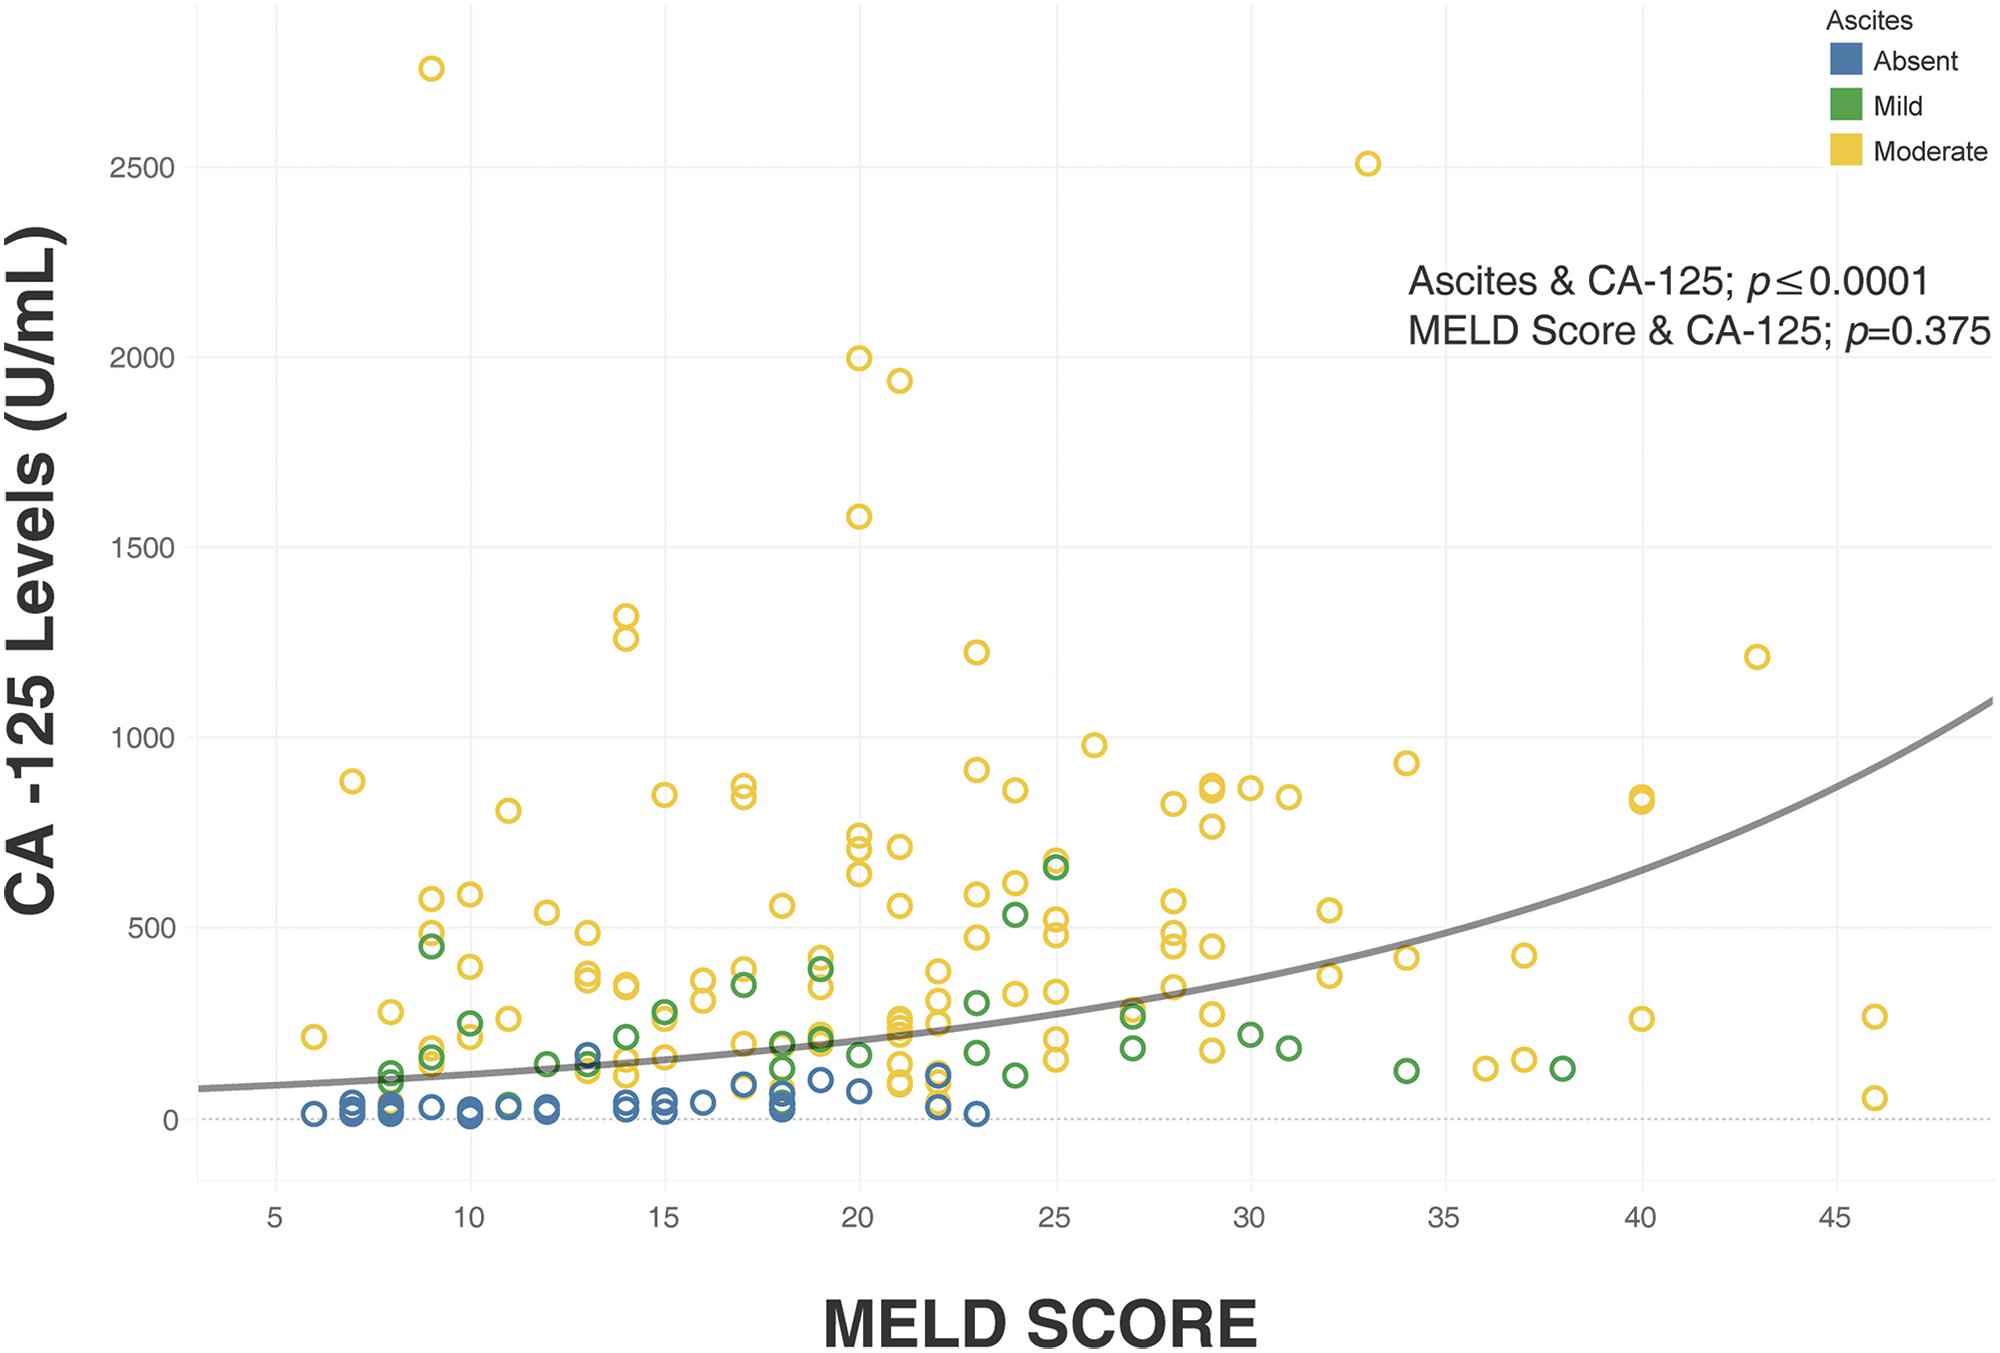 Linear regression analysis of CA-125 with MELD and degree of ascites.